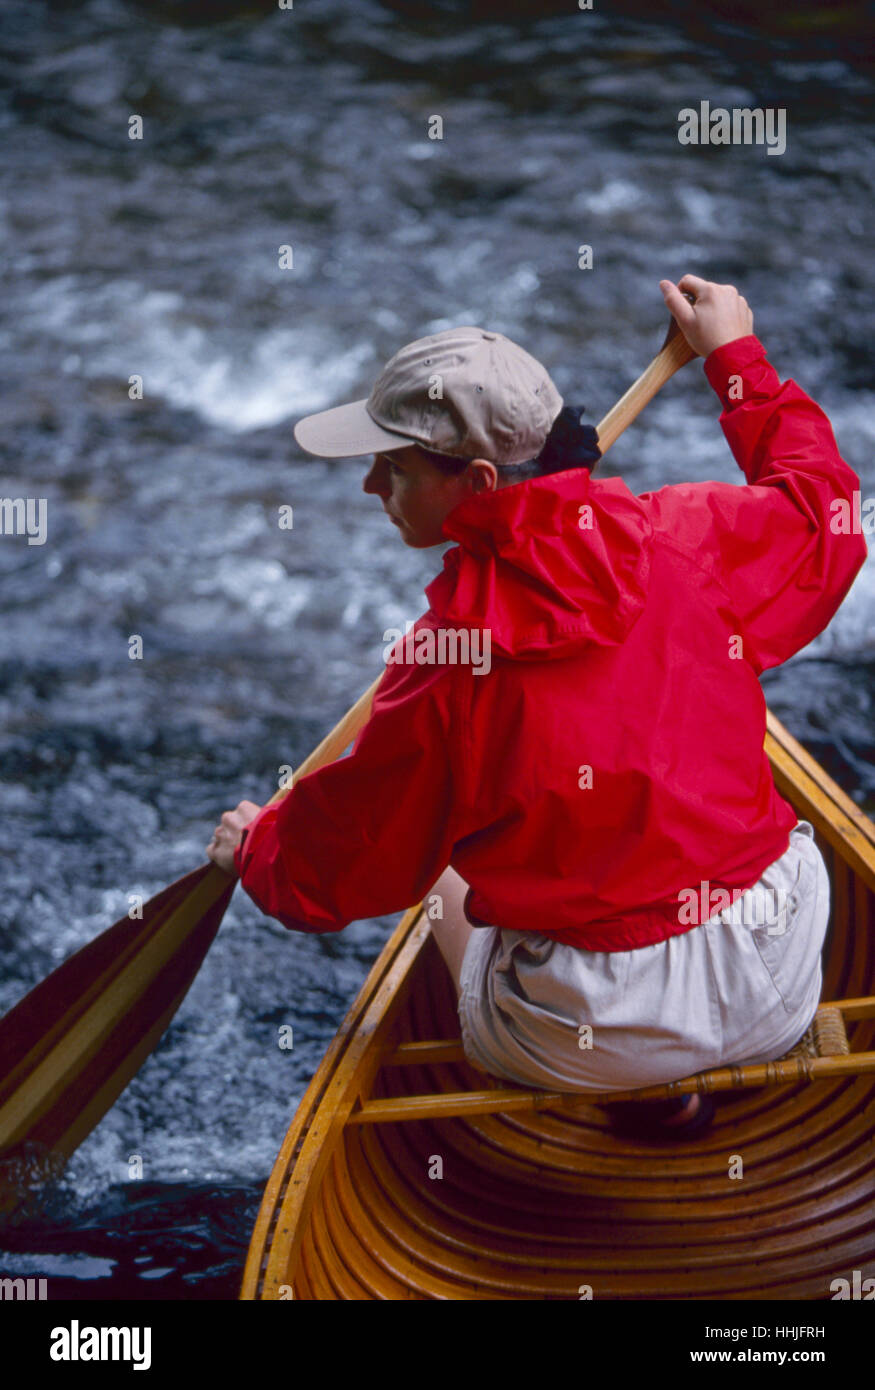 A young woman in her 20's wearing a bright red jacket paddles her vintage wood canoe in a  whitewater stream Stock Photo